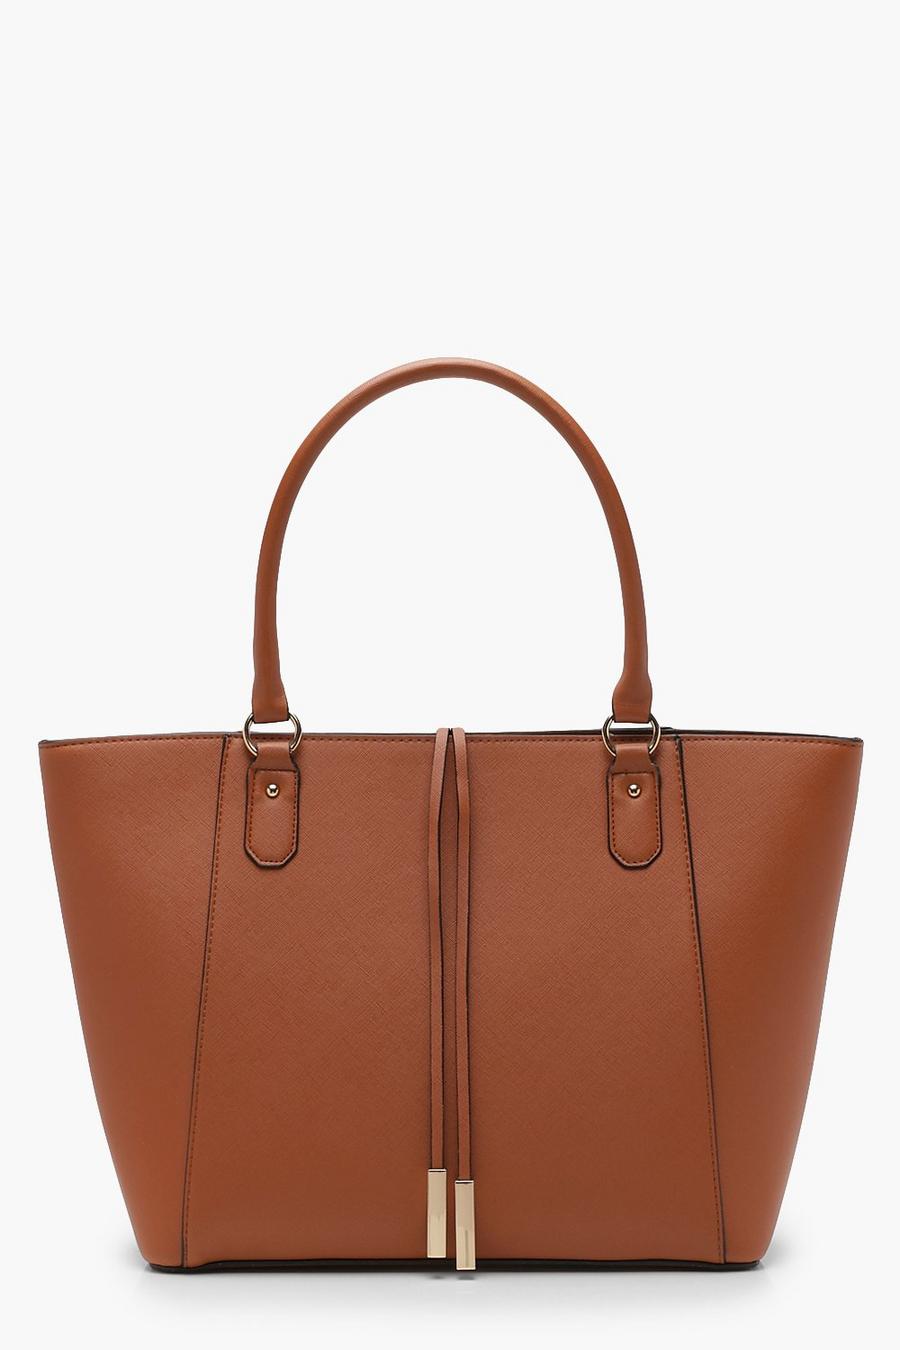 Tan Structured Cross Hatch Tote Bag image number 1